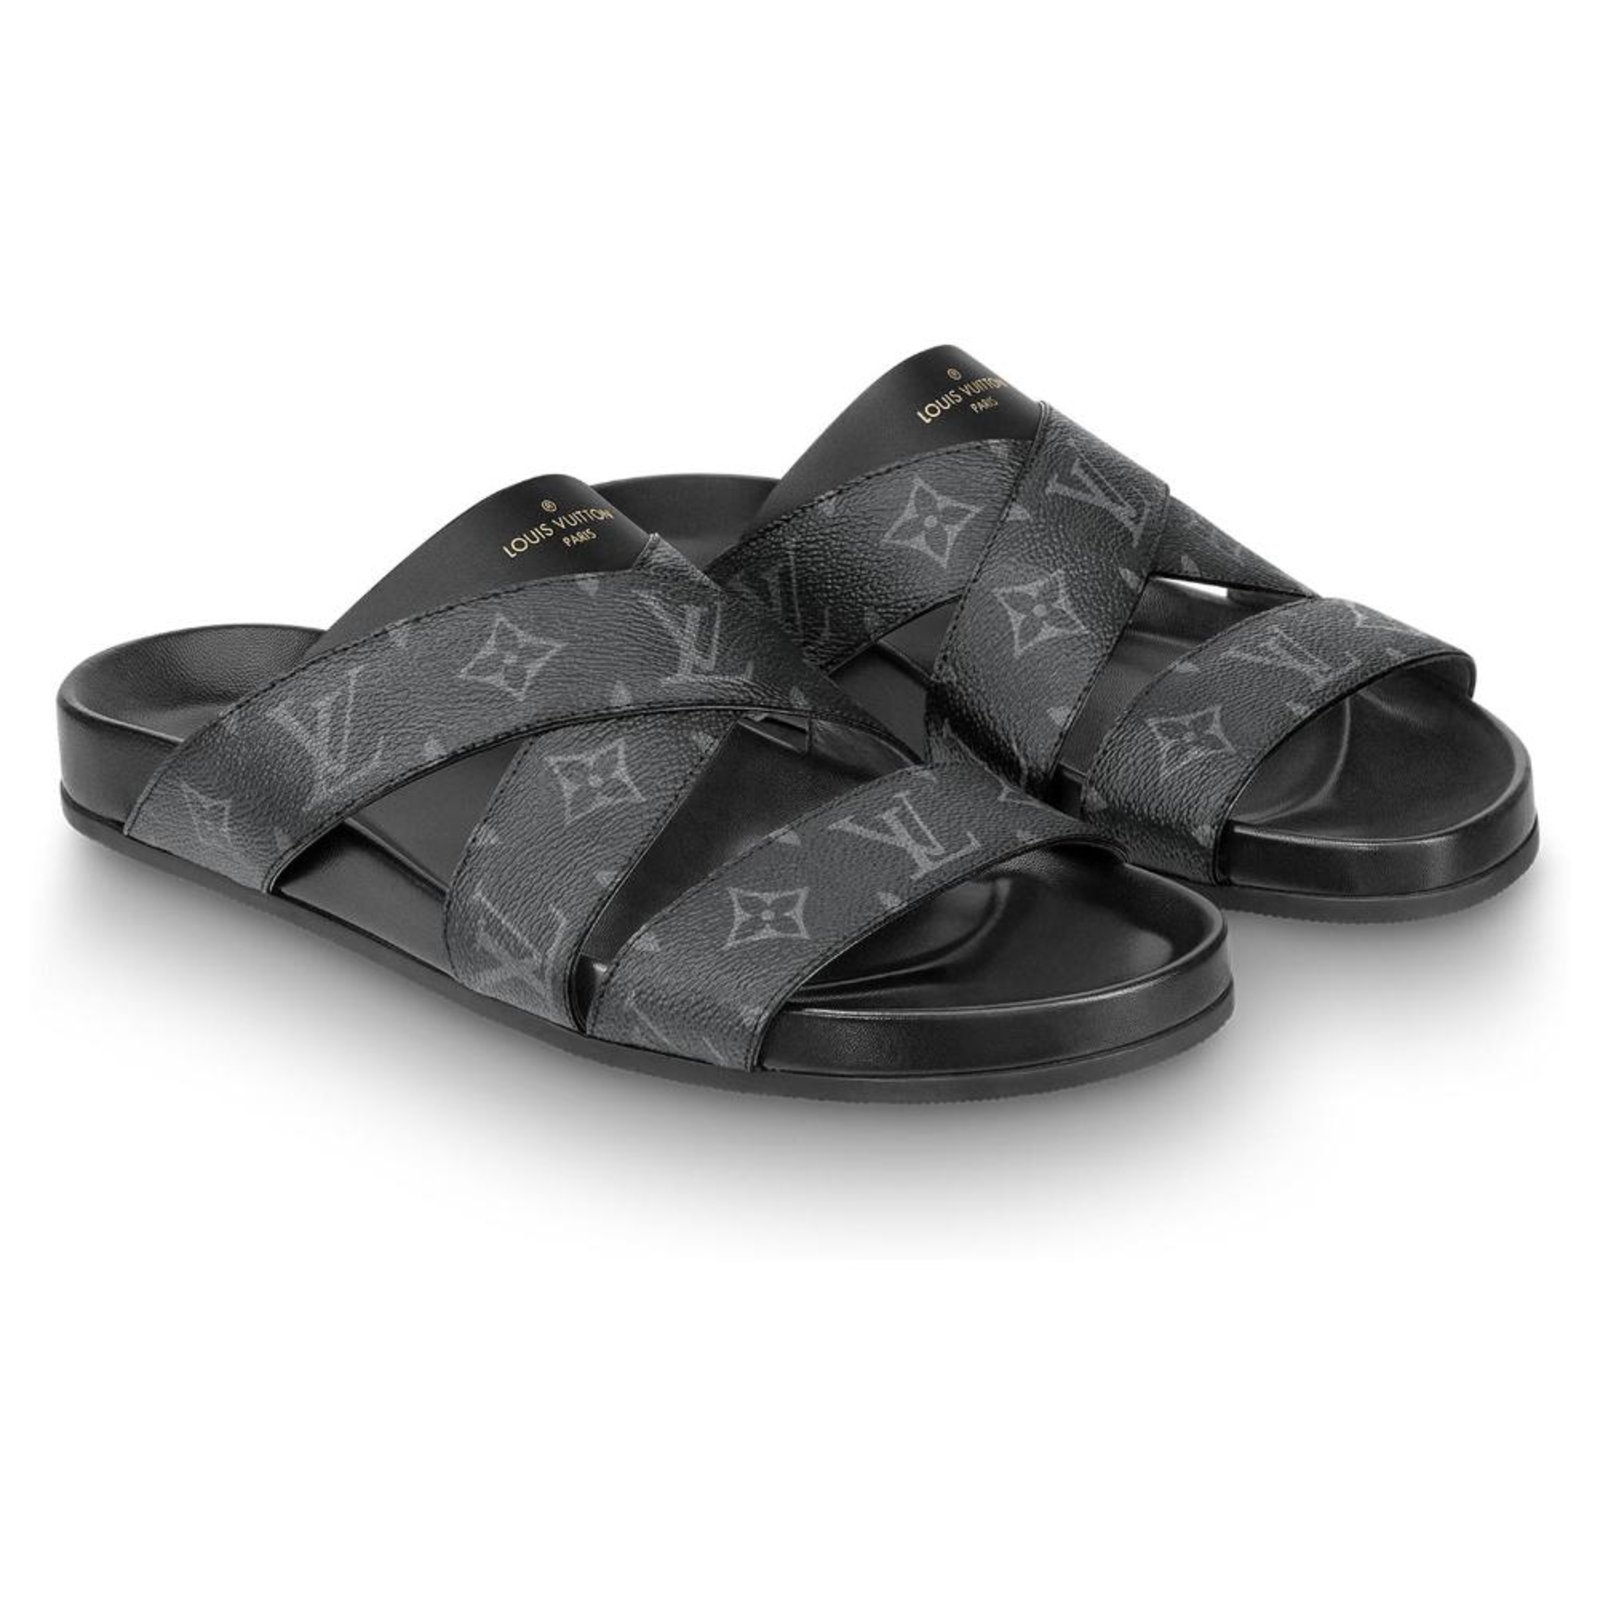 Louis Vuitton Grey Home Slippers - USALast